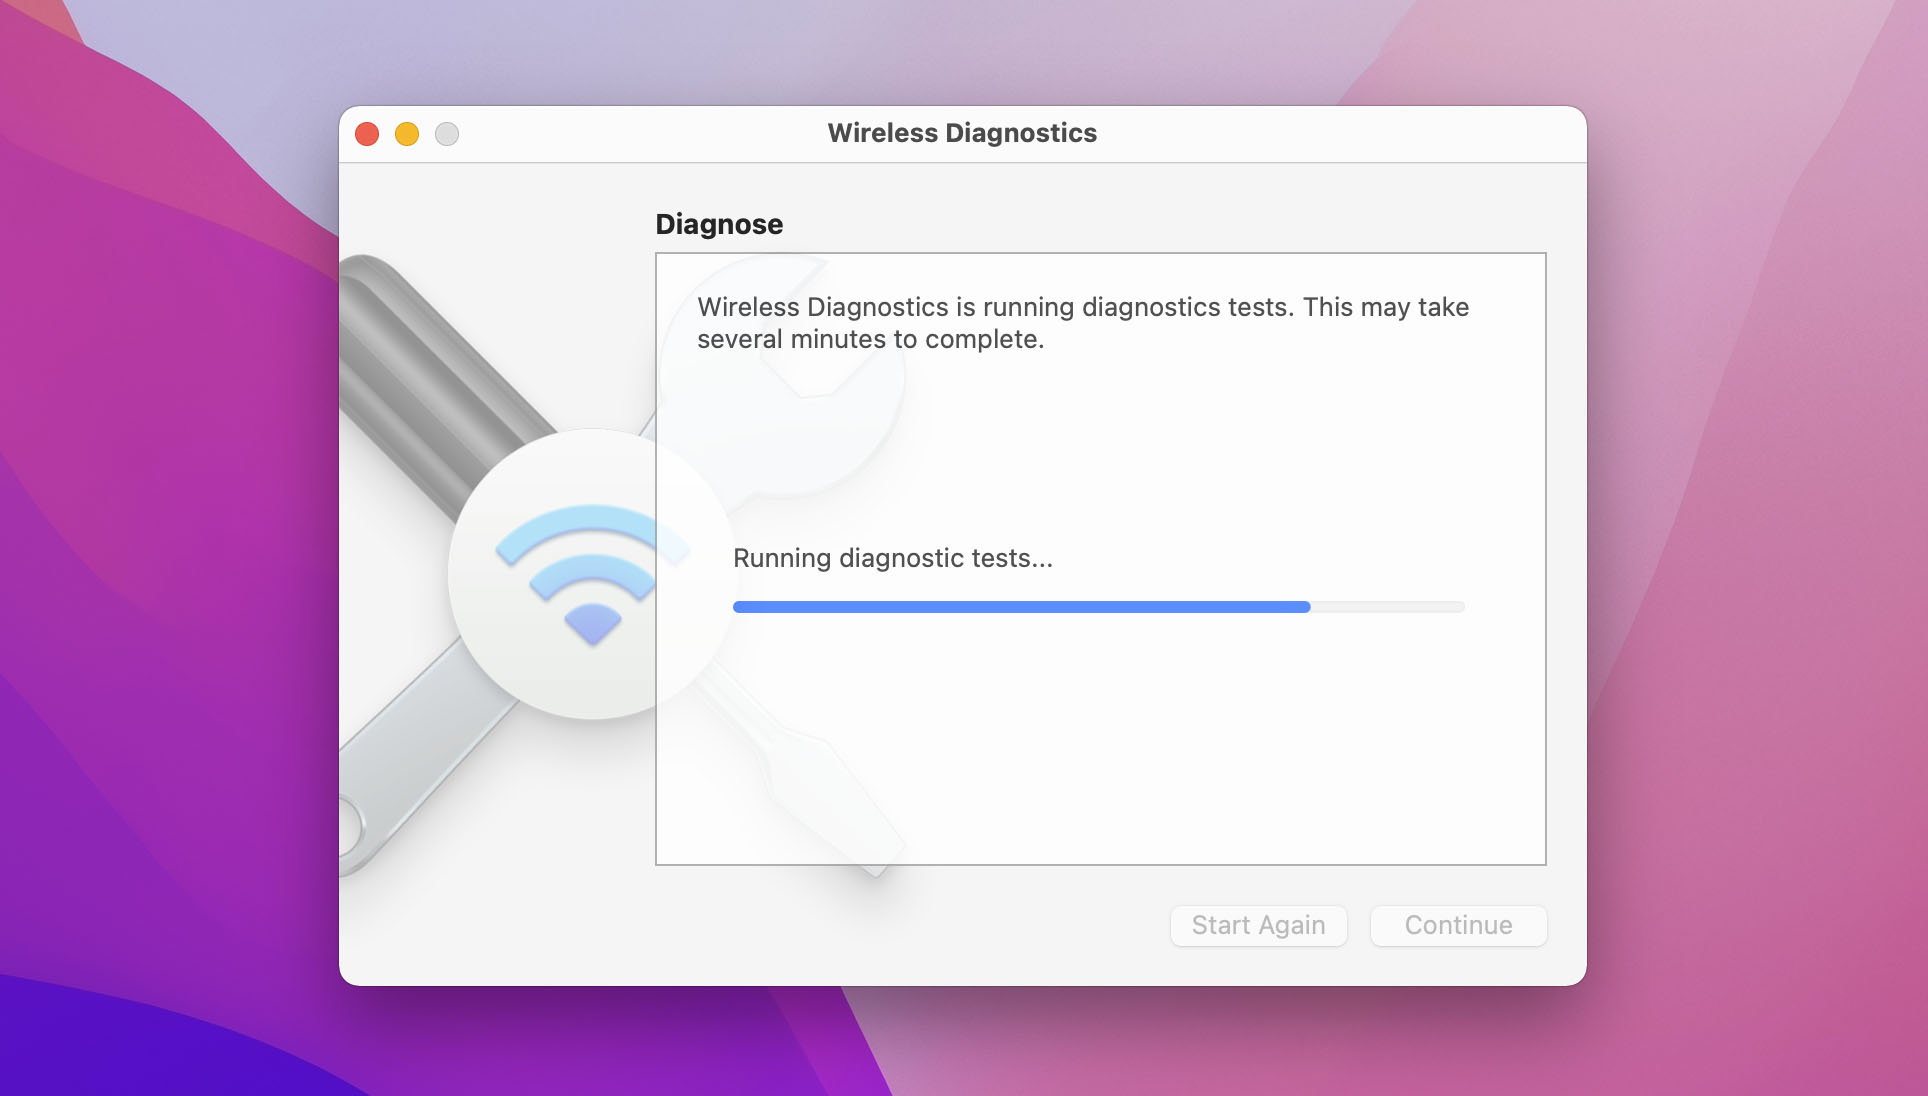 Wait until Wireless Diagnostics finishes running all tests